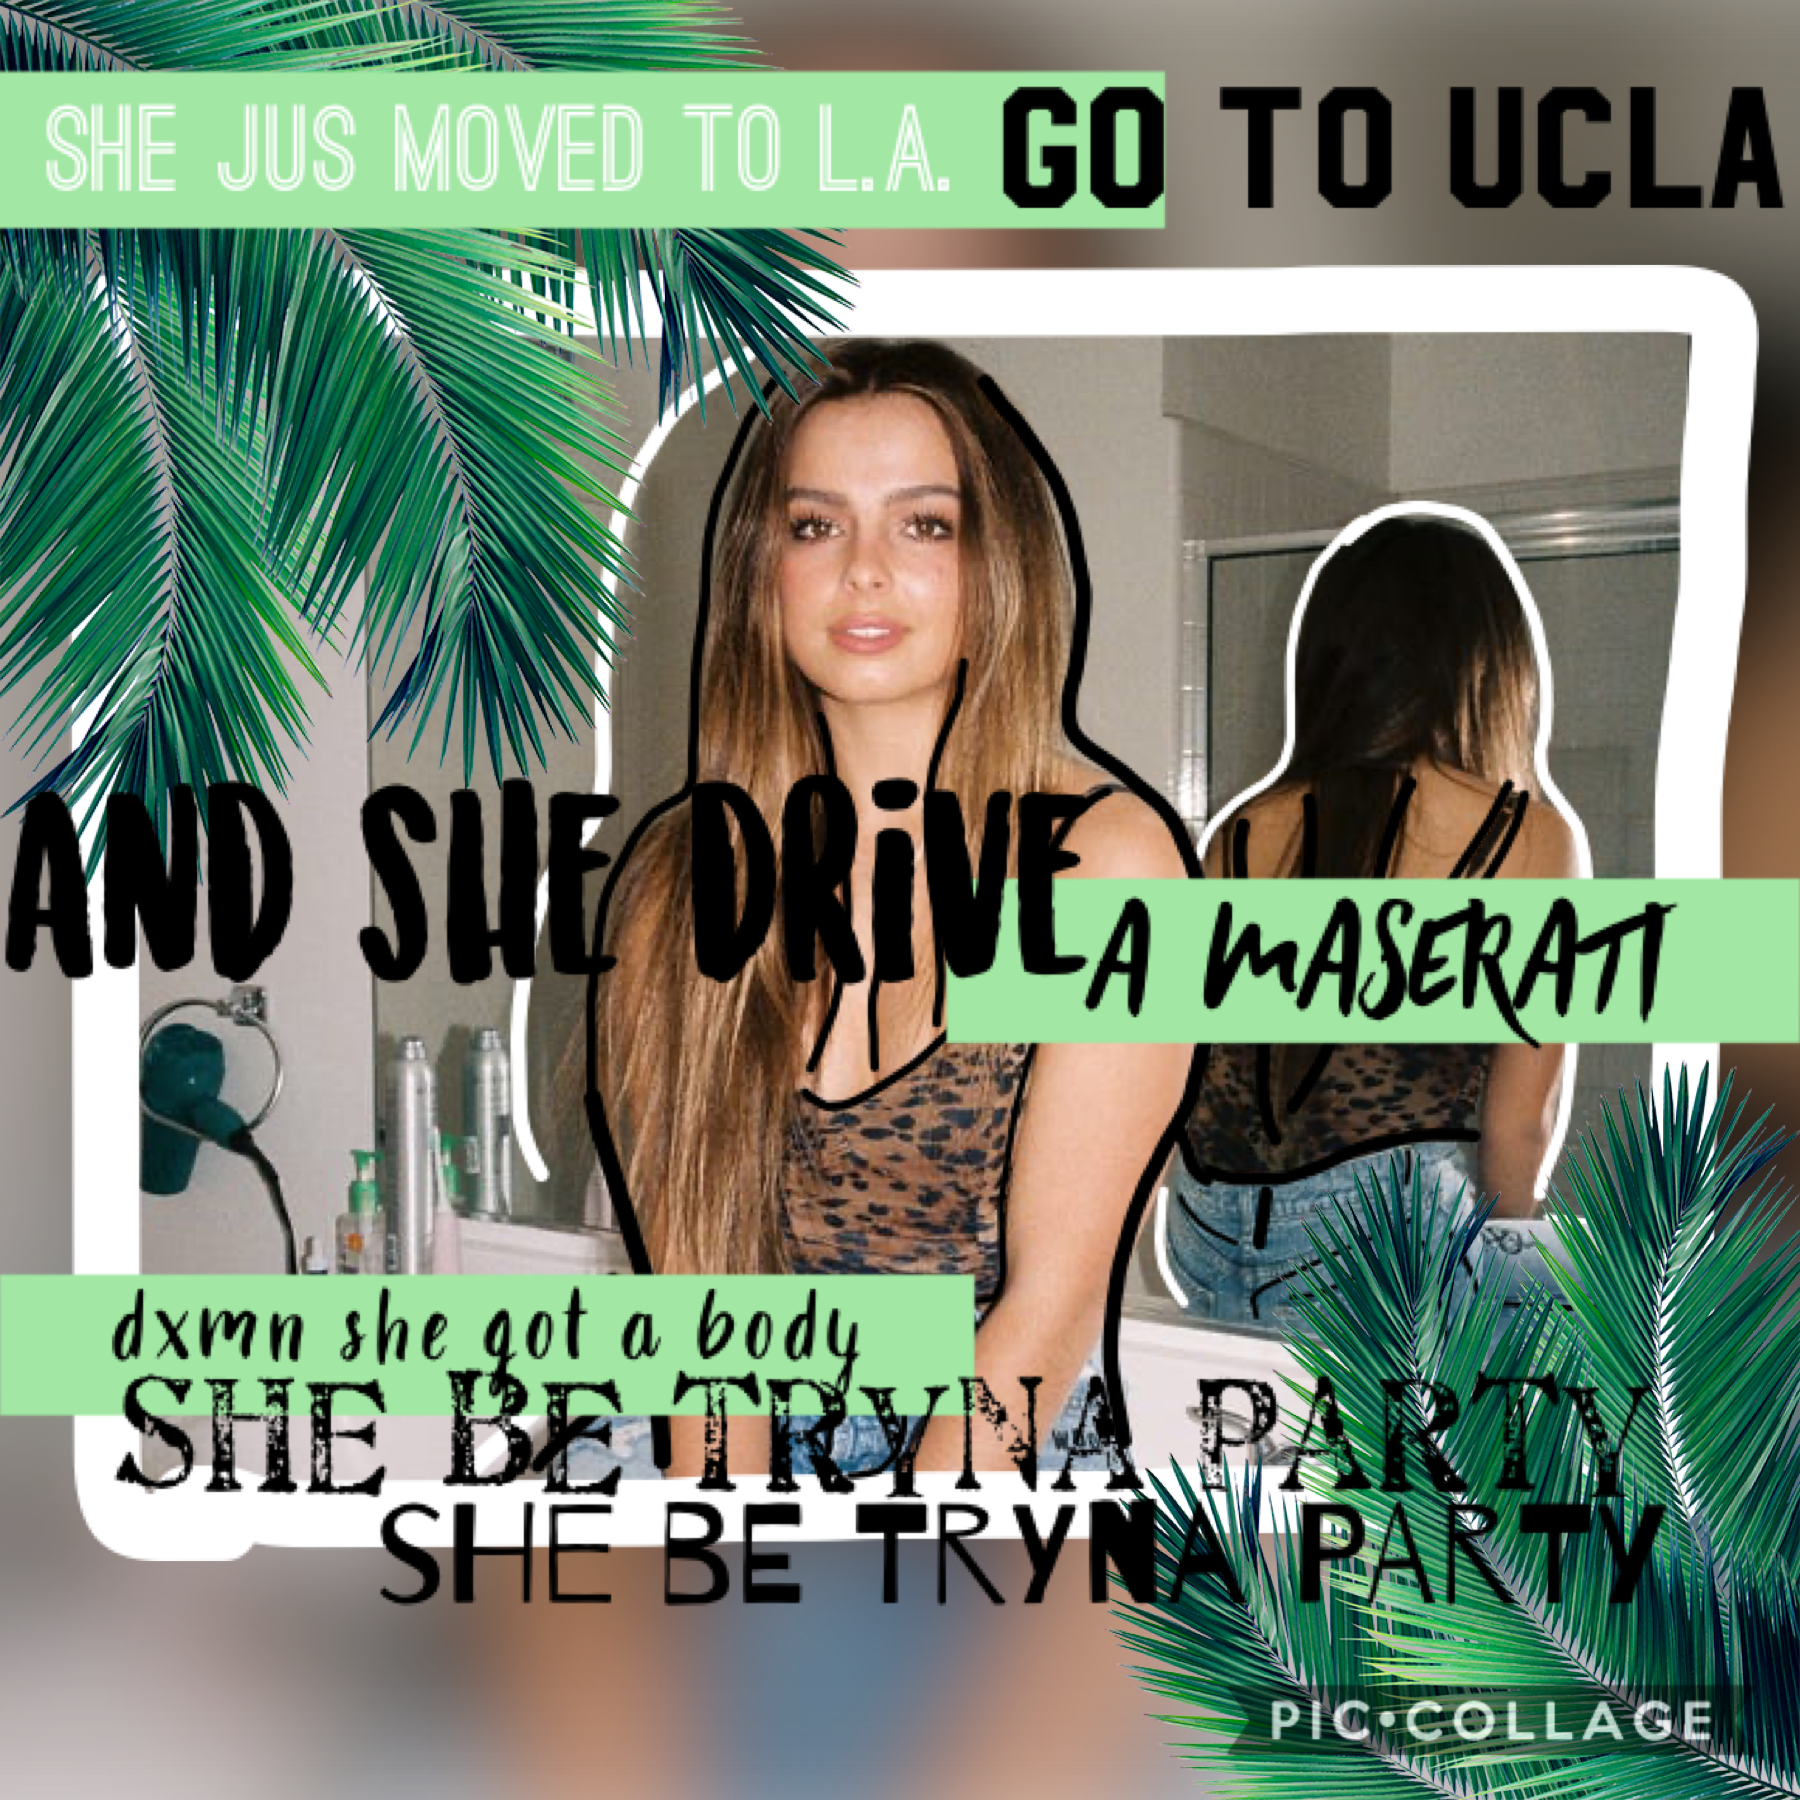 🎉TAP🎉 

song- UCLA by RL grime 
collage made by- kyliegh
other accs:
kyliegh_models
dixie_damelioFANPAGE